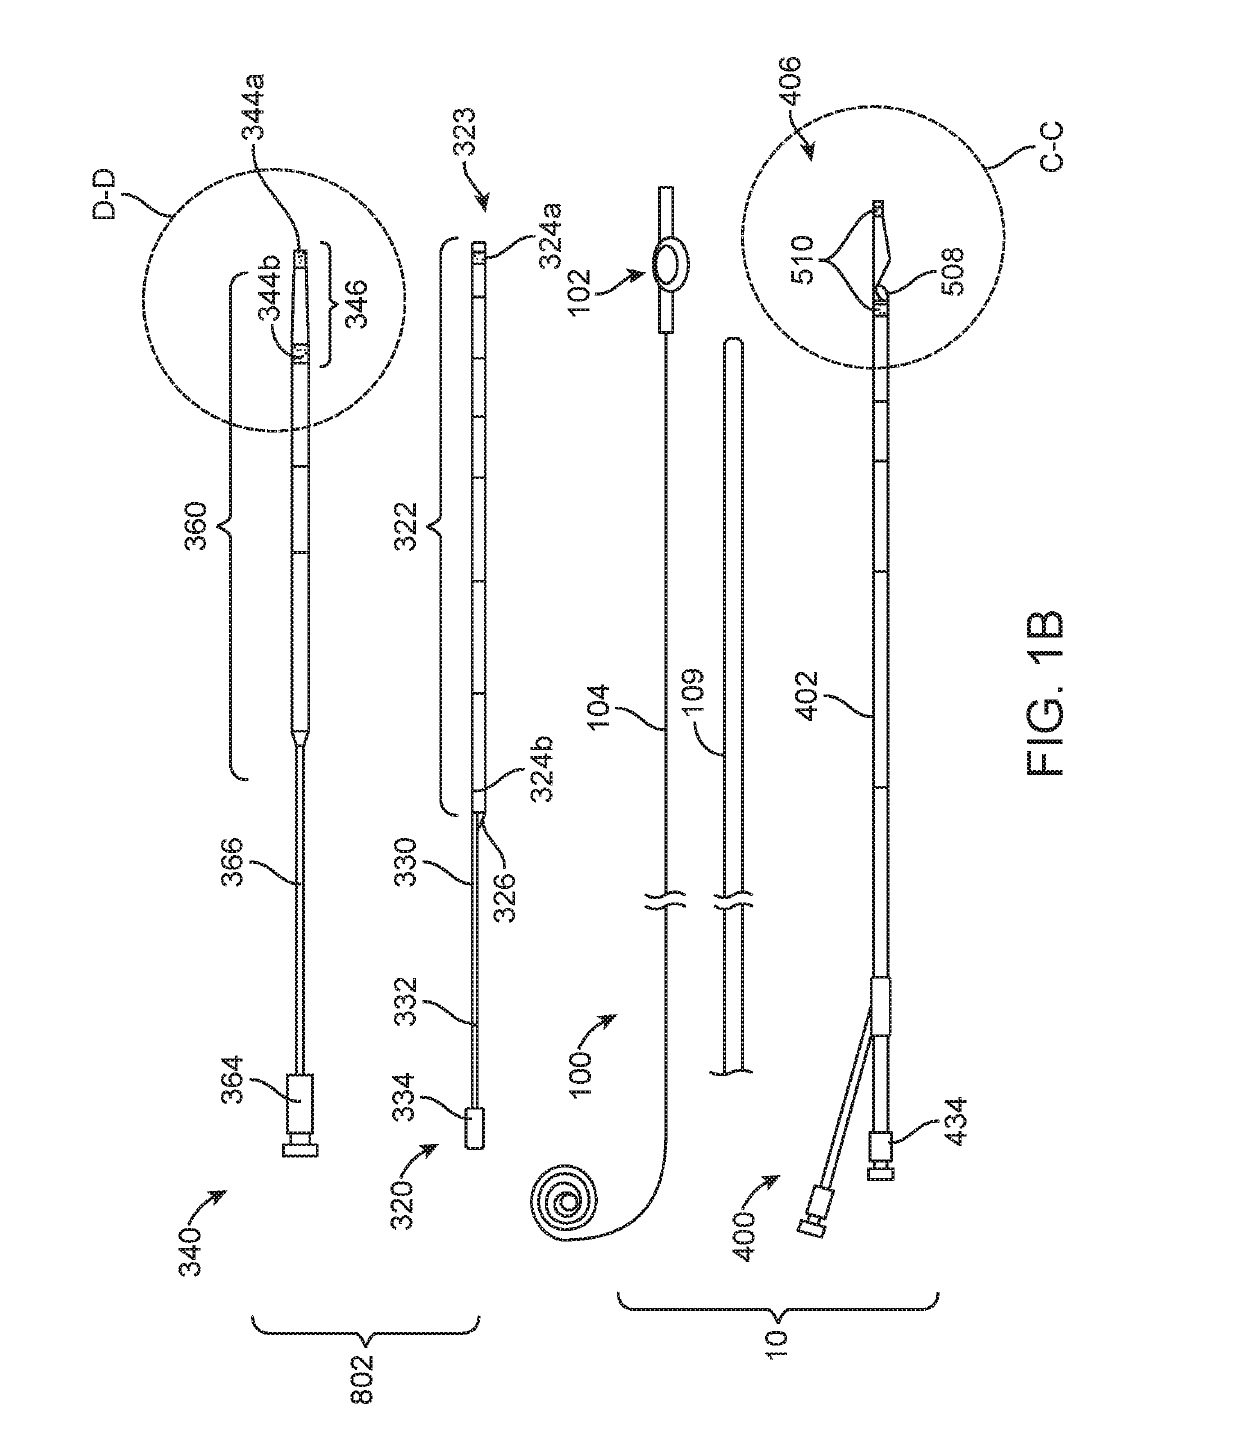 Anchoring delivery system and methods